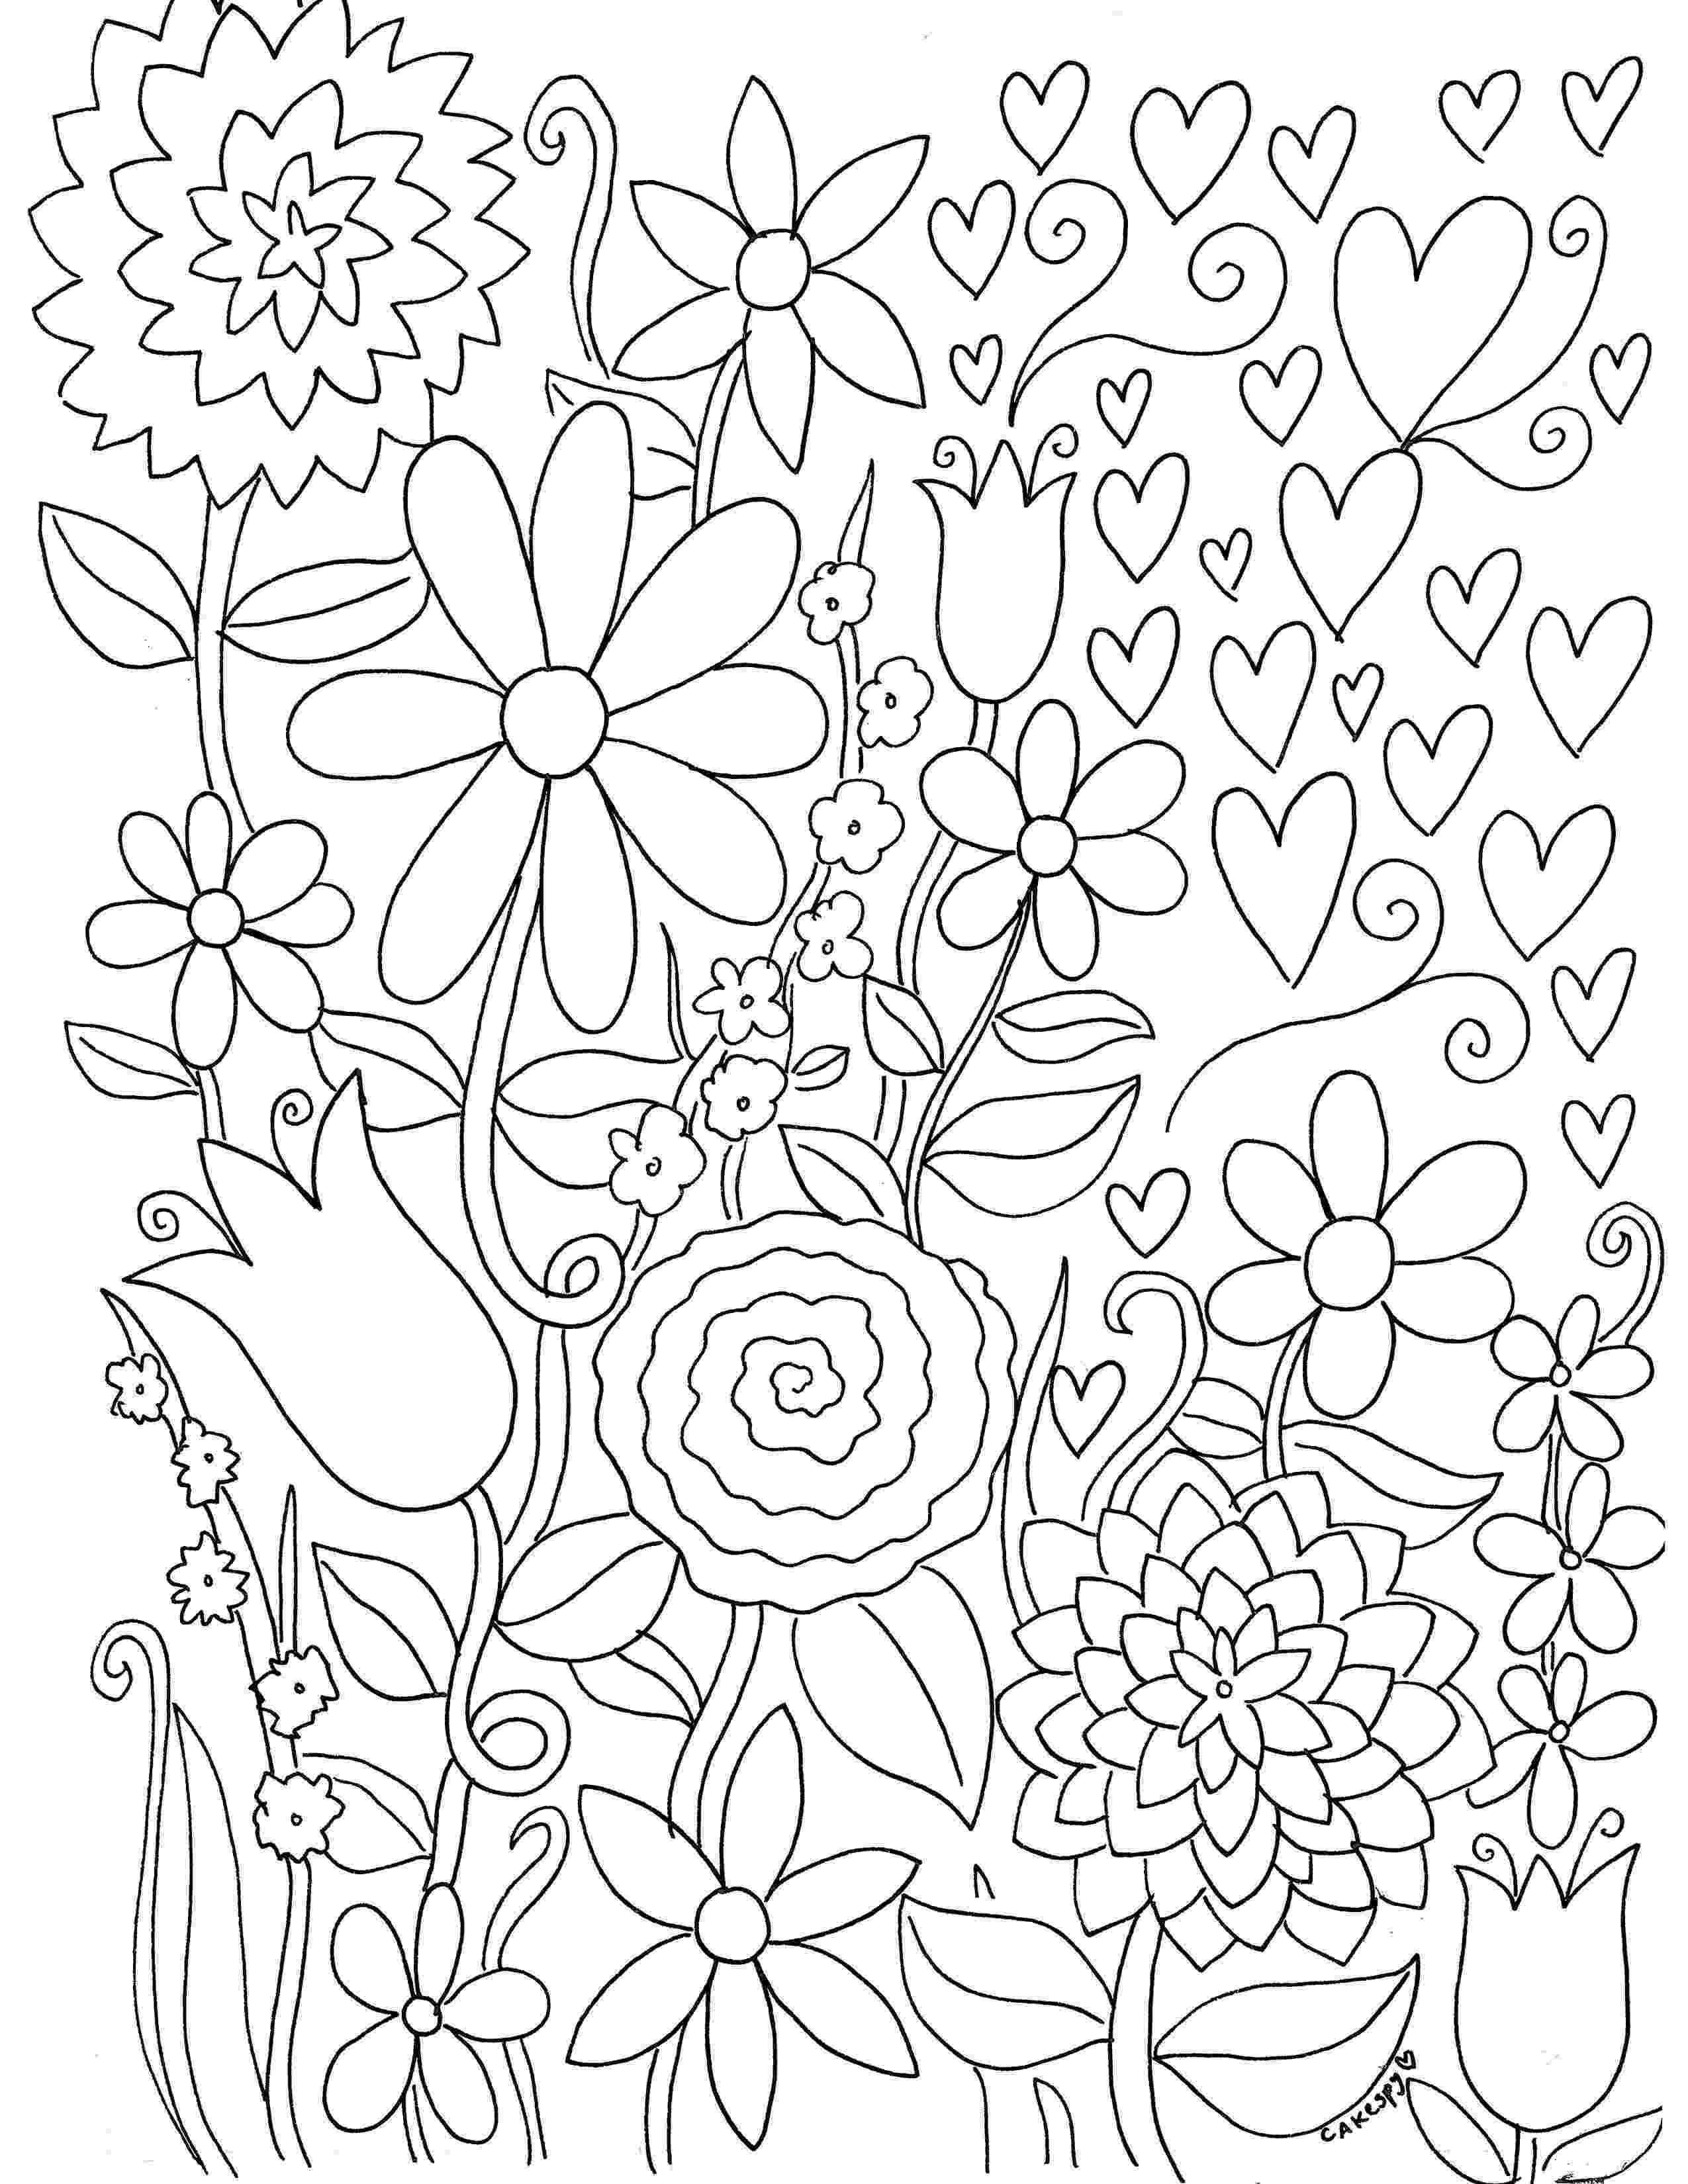 coloring book for grown ups free download welcome to dover publications free sample join fb for download free book coloring ups grown 